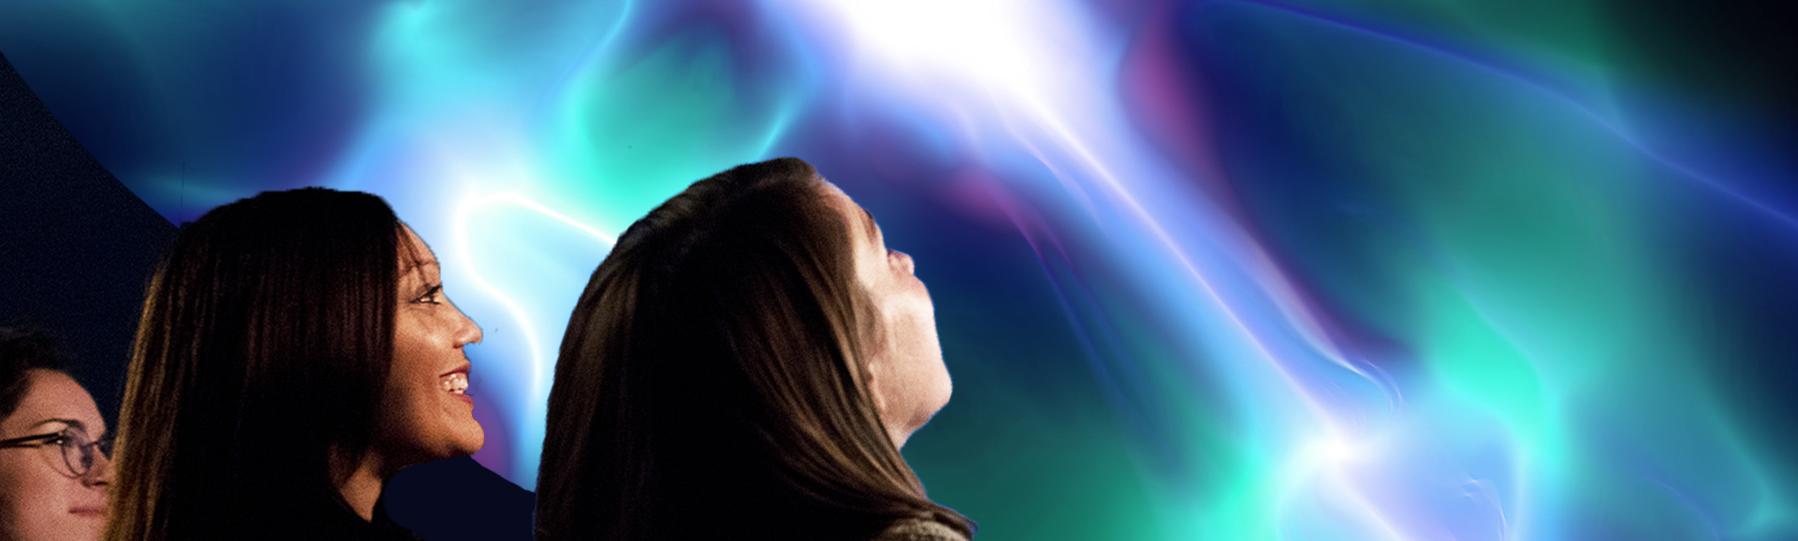 Close up of the profiles of 3 women as the look up at the planetarium dome which displays colorful lights and lasers.